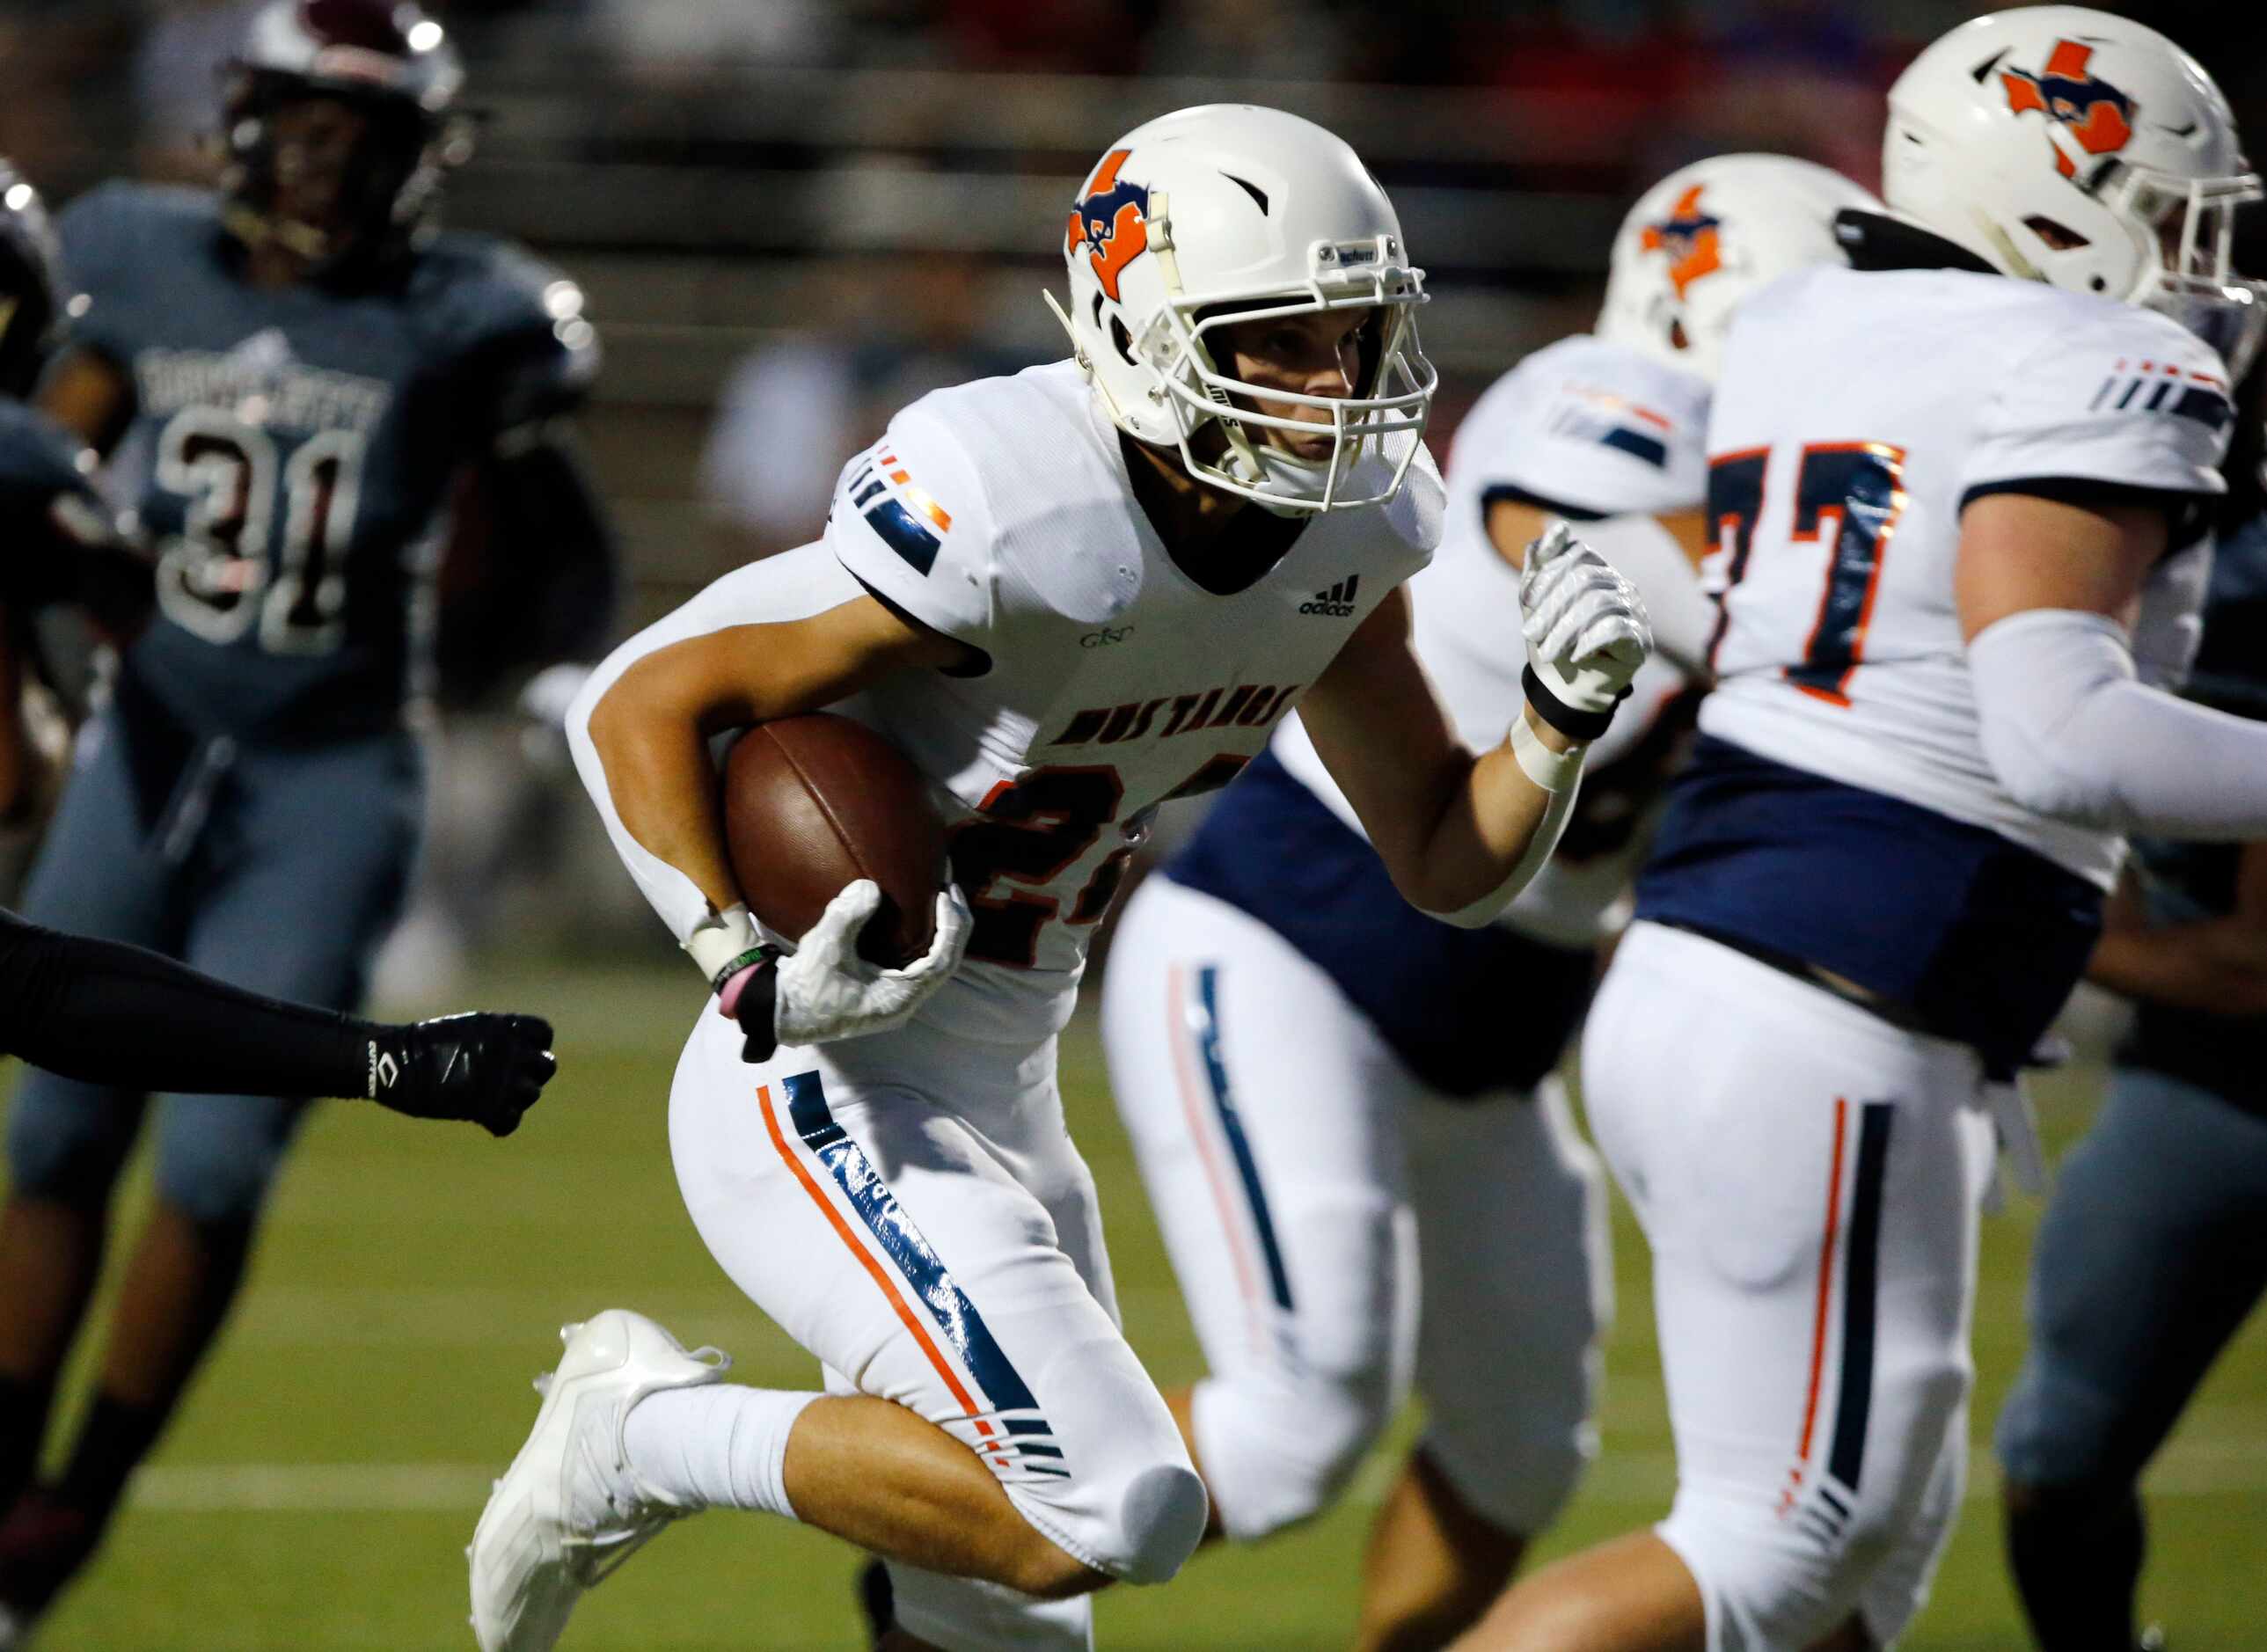 Sachse RB RC Reeves (24) breezes through the Rowlett defense in route to another touchdown...